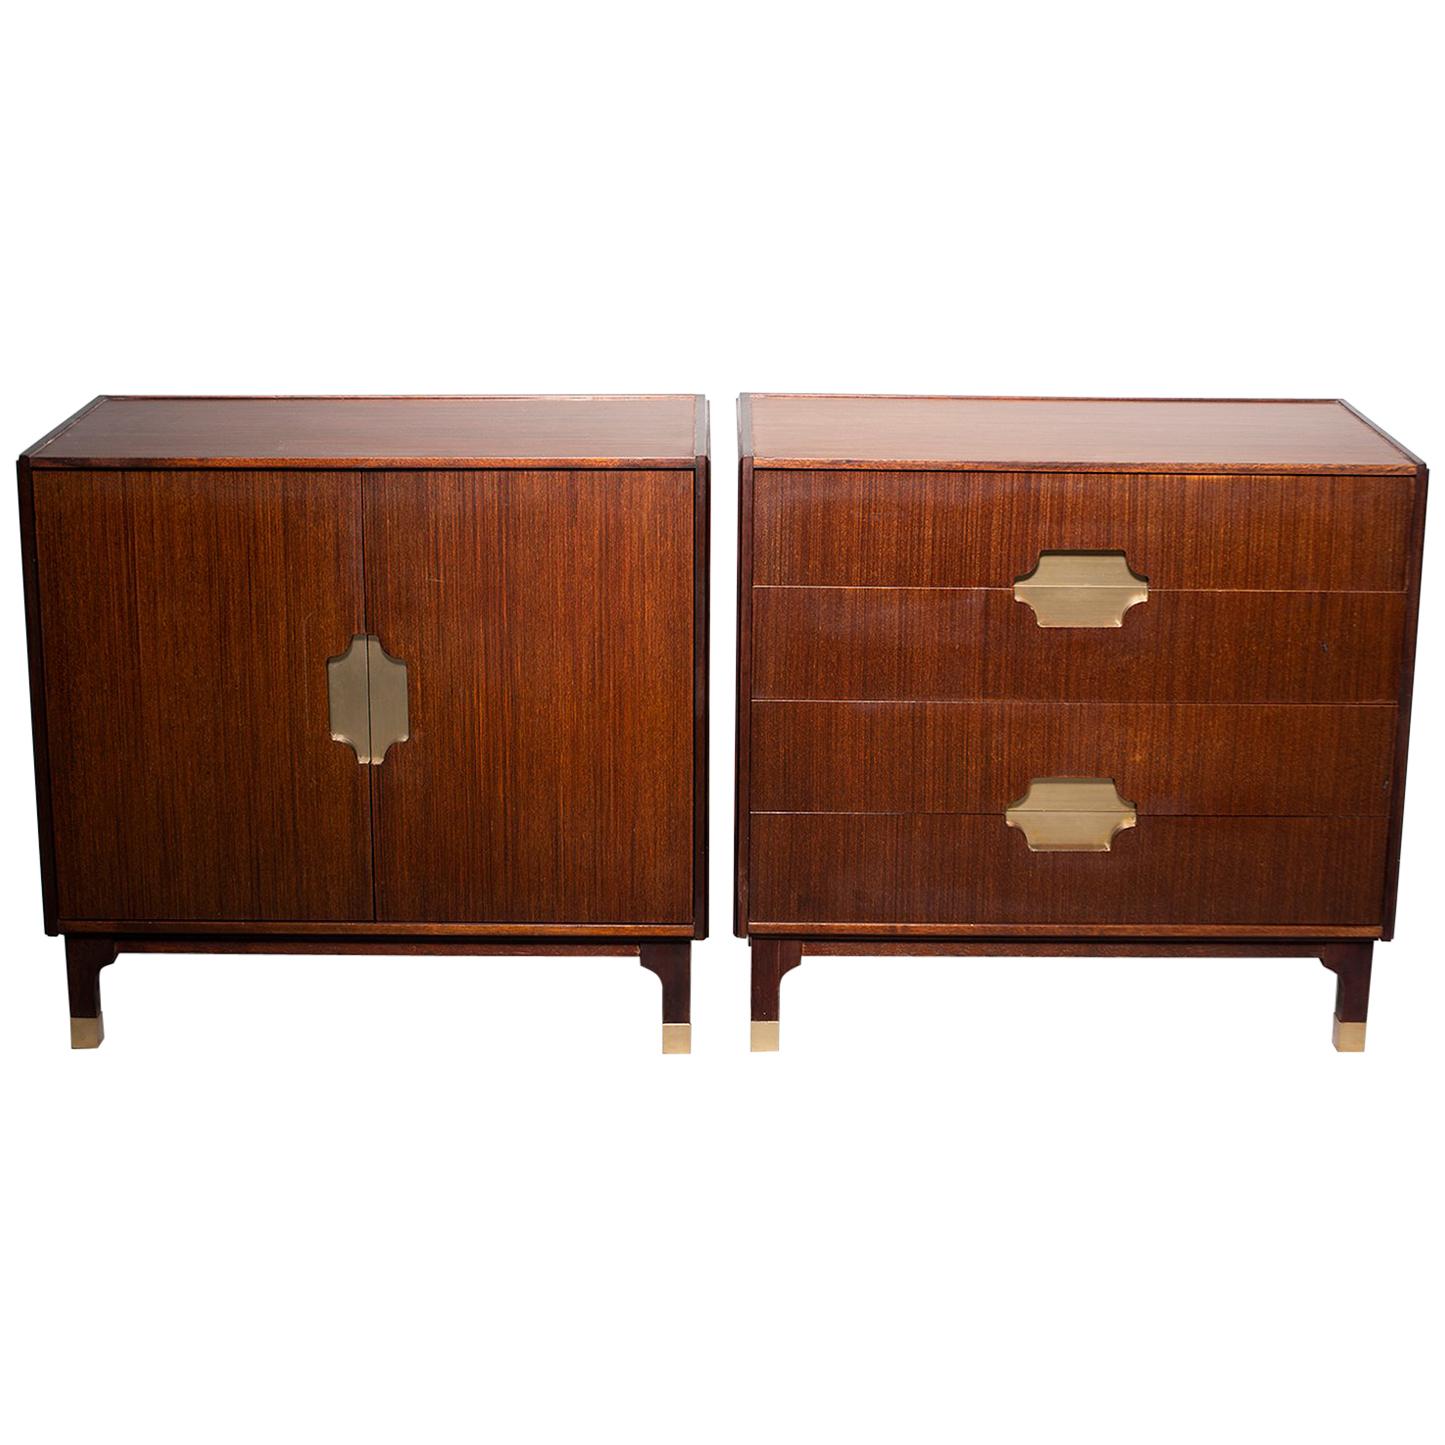 Pair of Midcentury Walnut Chests with Brass Hardware